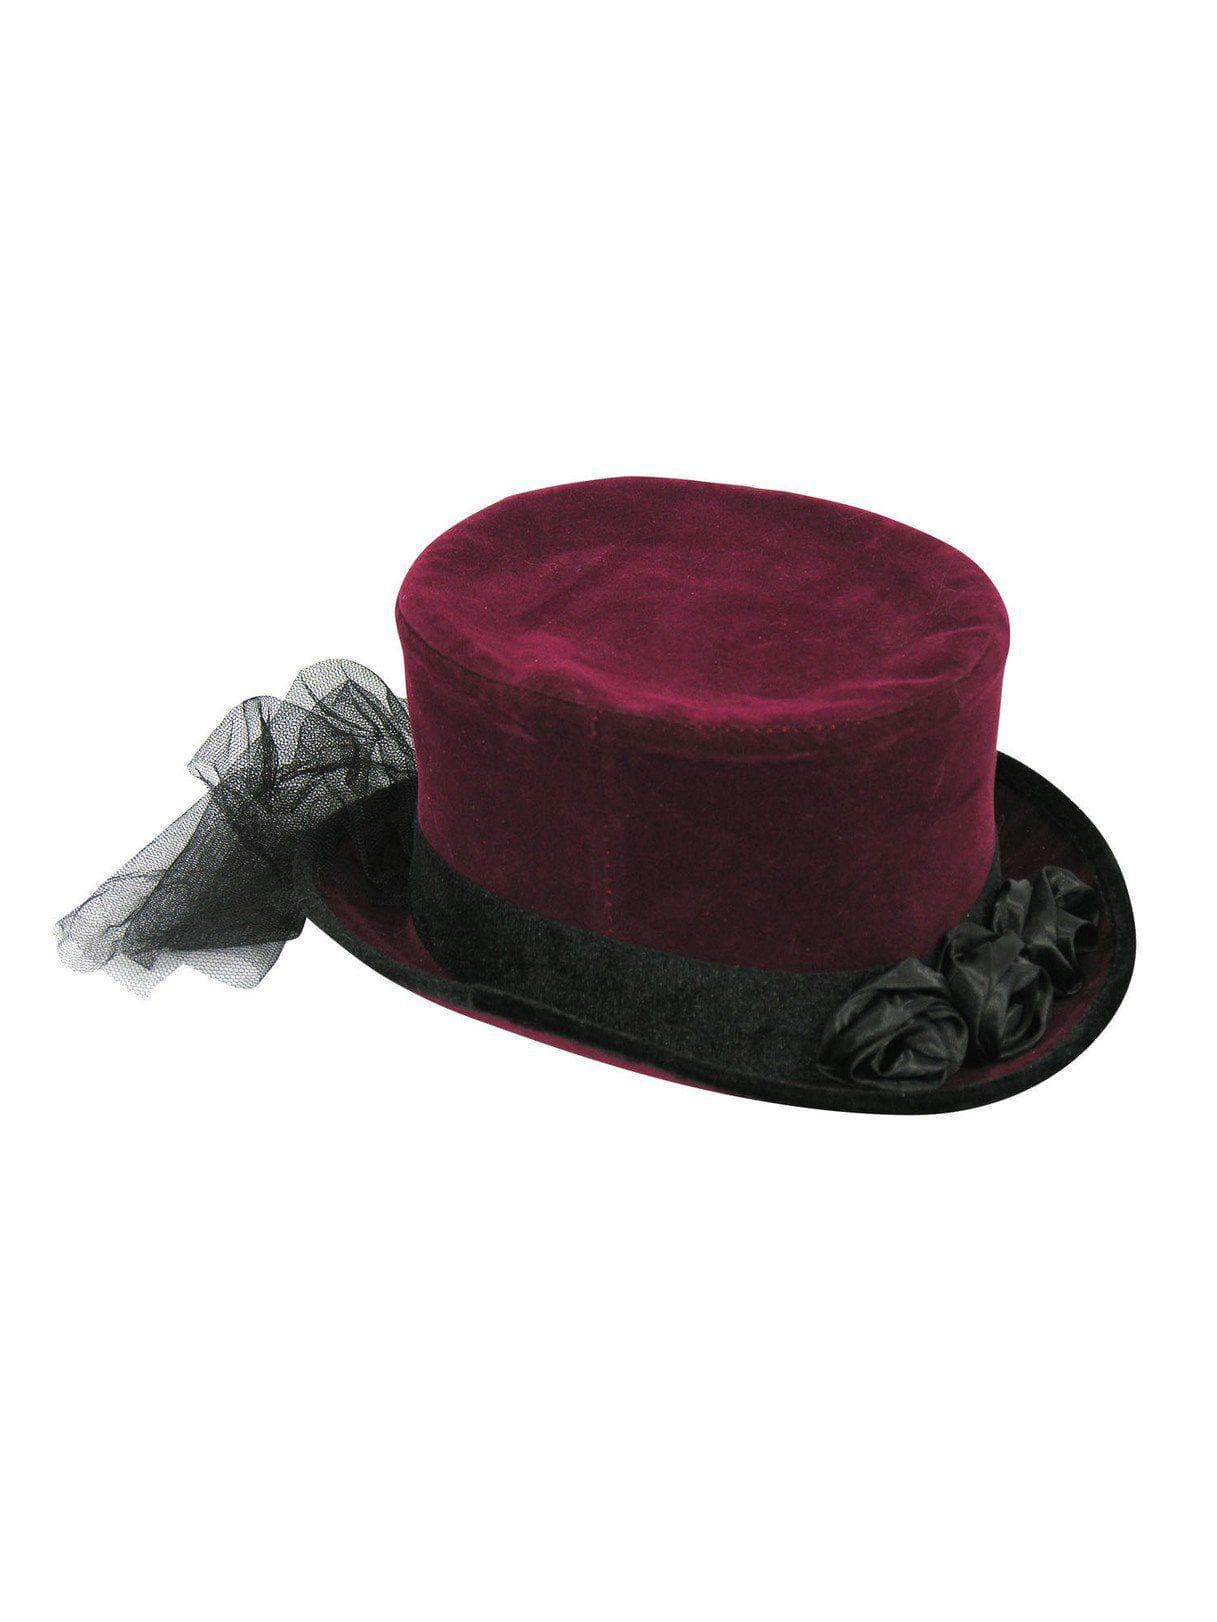 Adult Burgundy Tulle and Flower Trimmed Top Hat - costumes.com